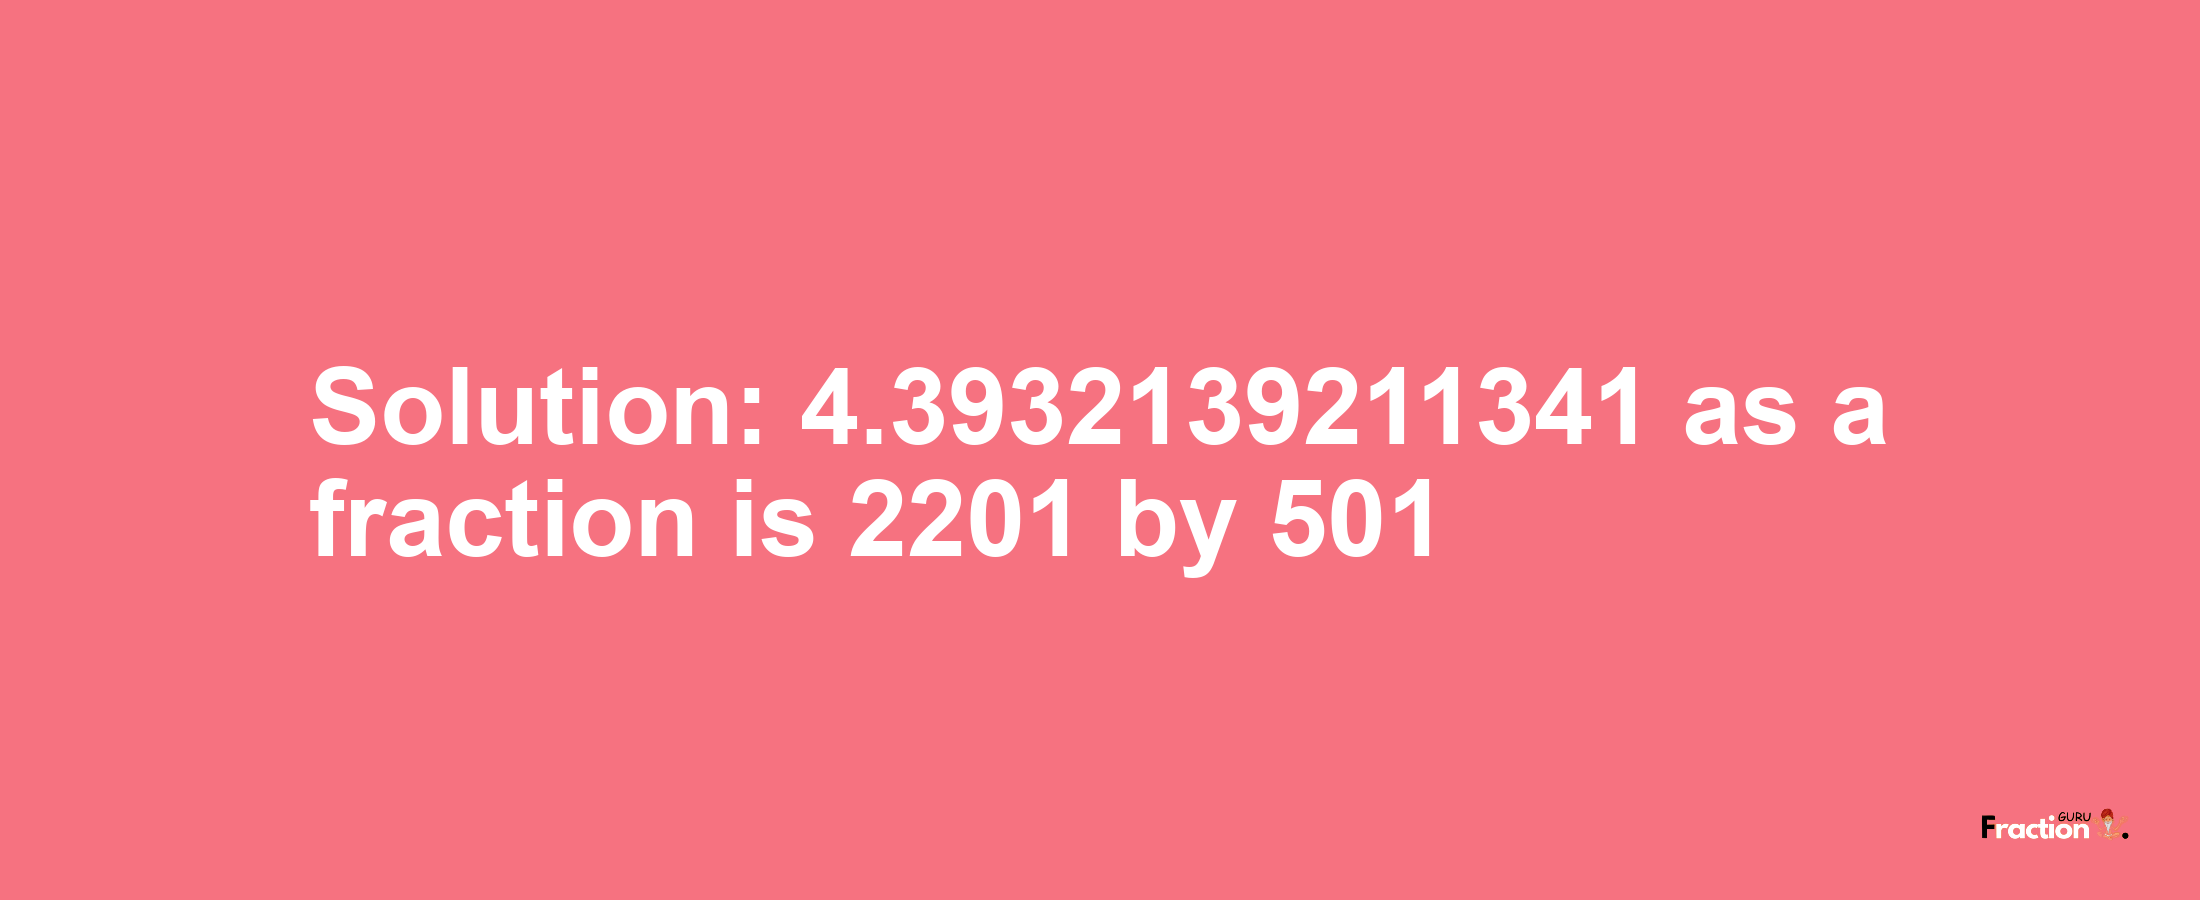 Solution:4.3932139211341 as a fraction is 2201/501